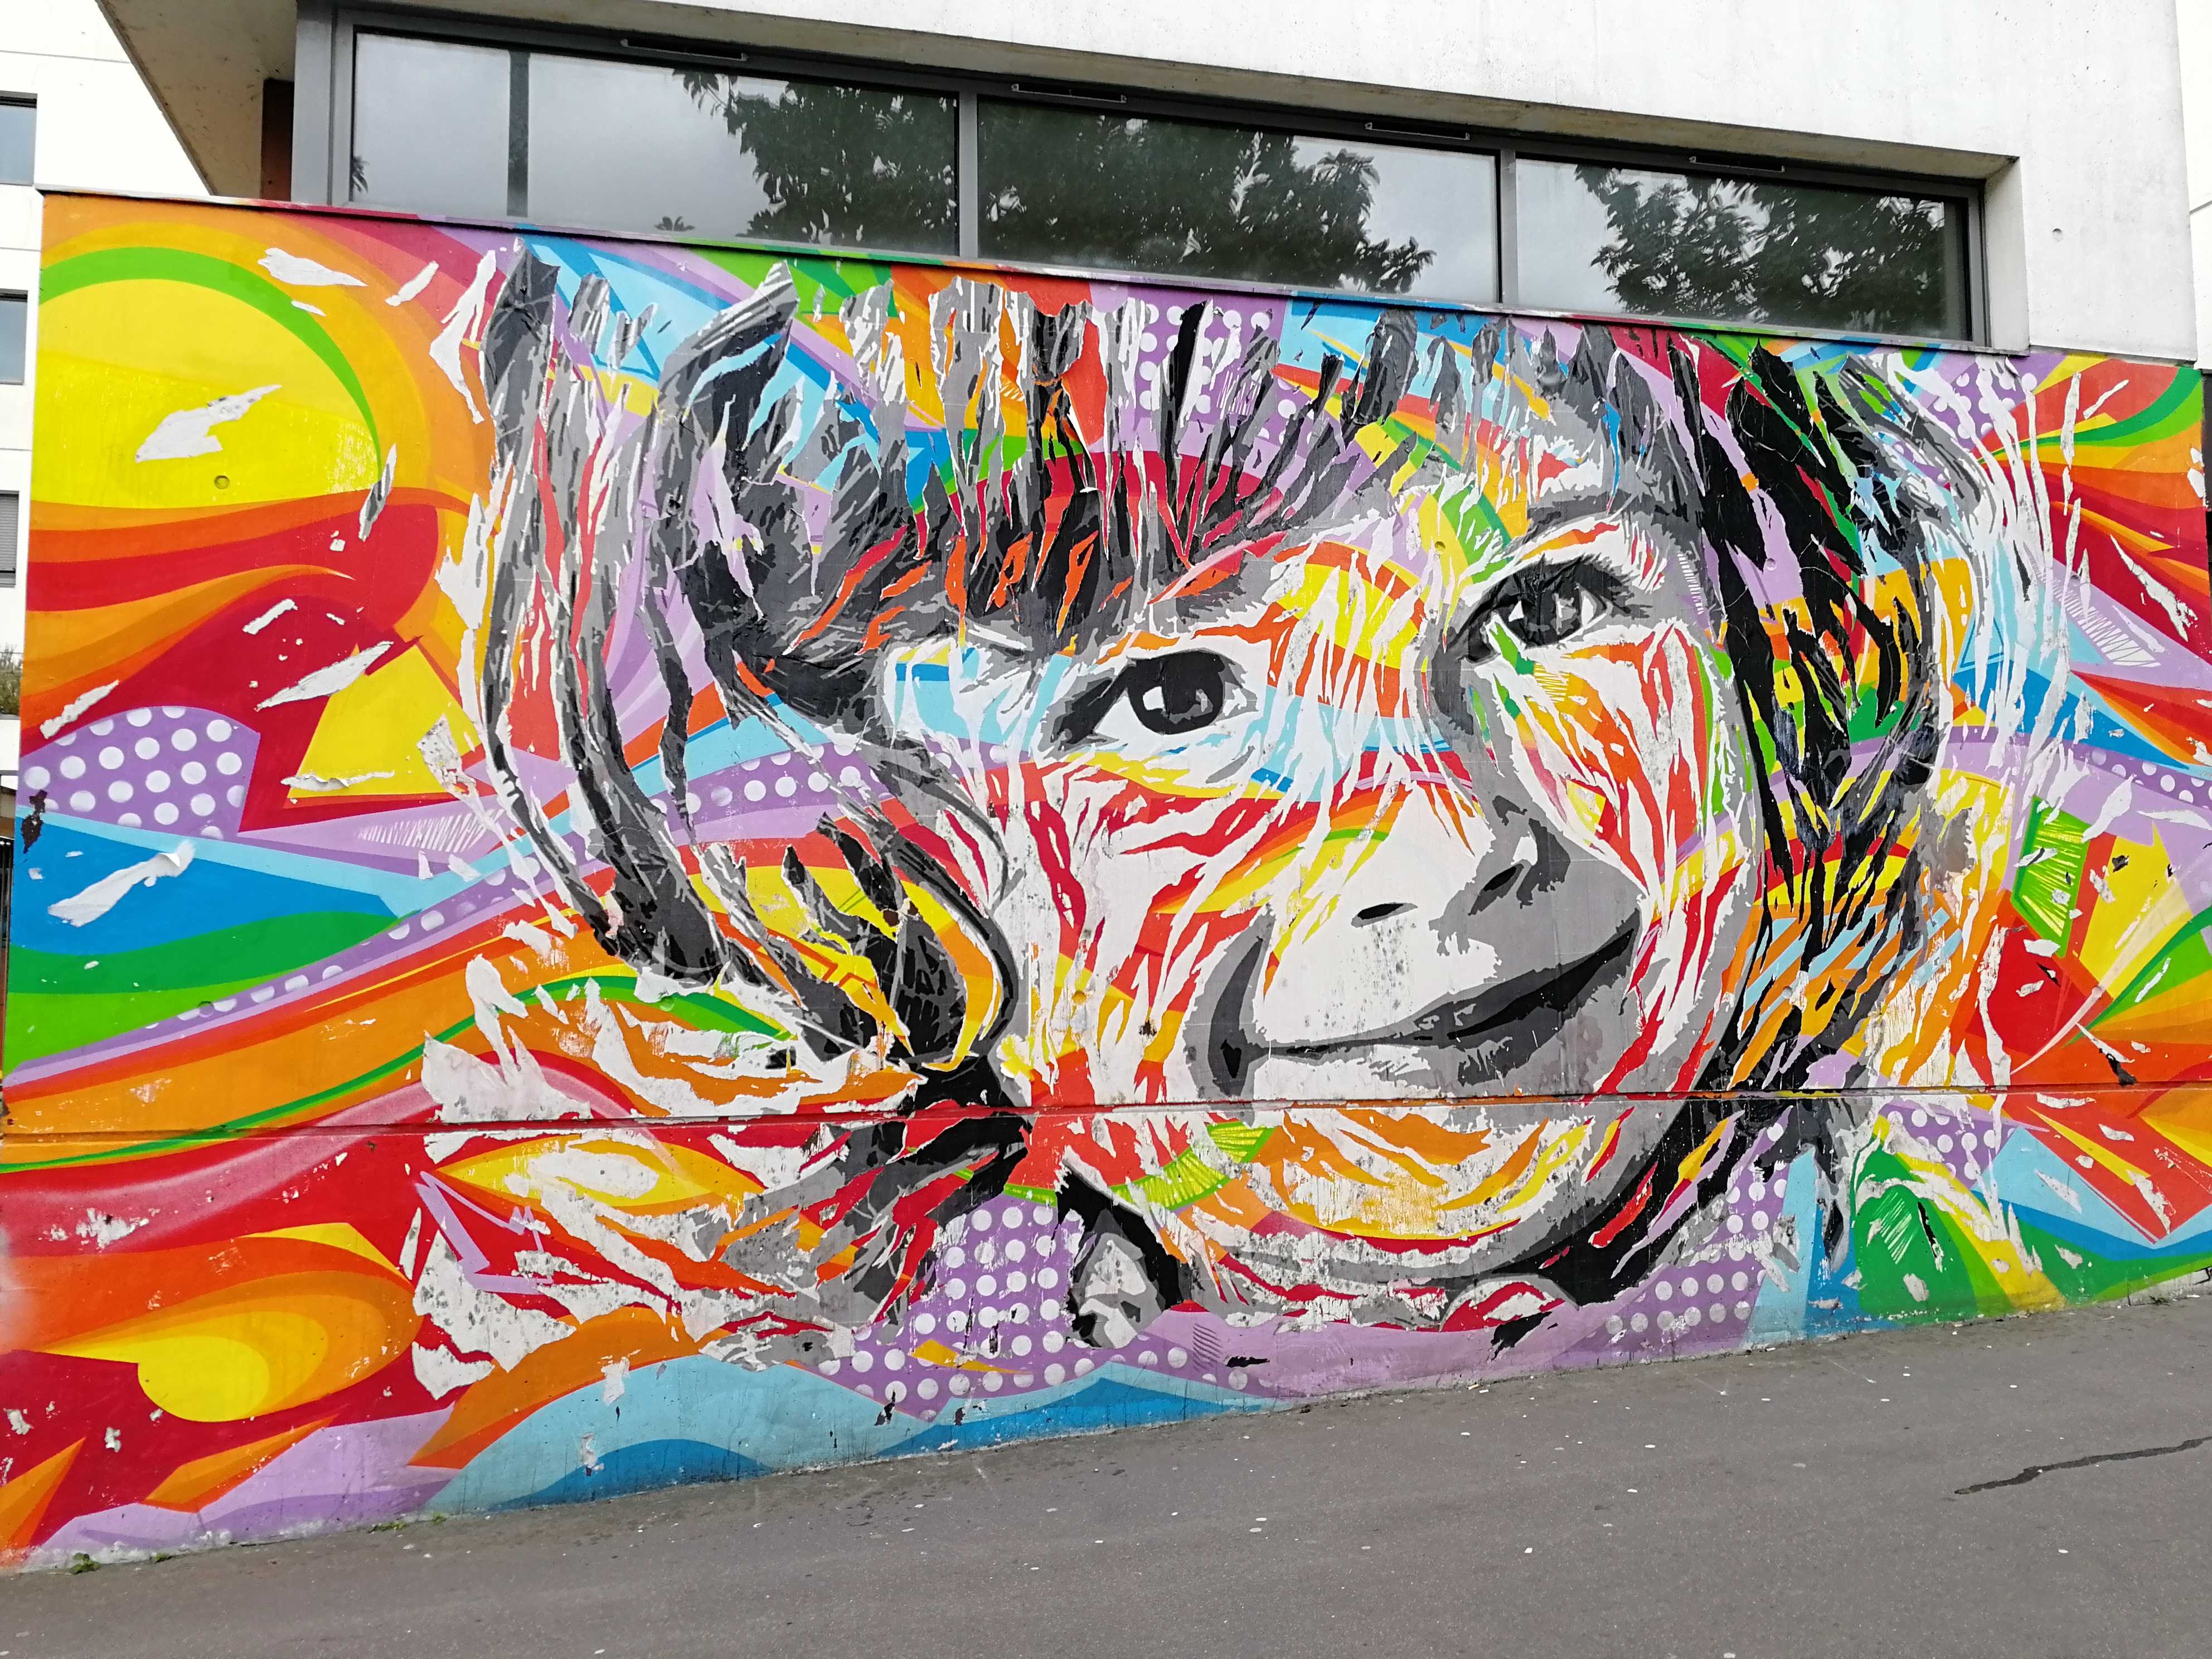 Graffiti 3956  by the artist Jodibona captured by Rabot in Paris France